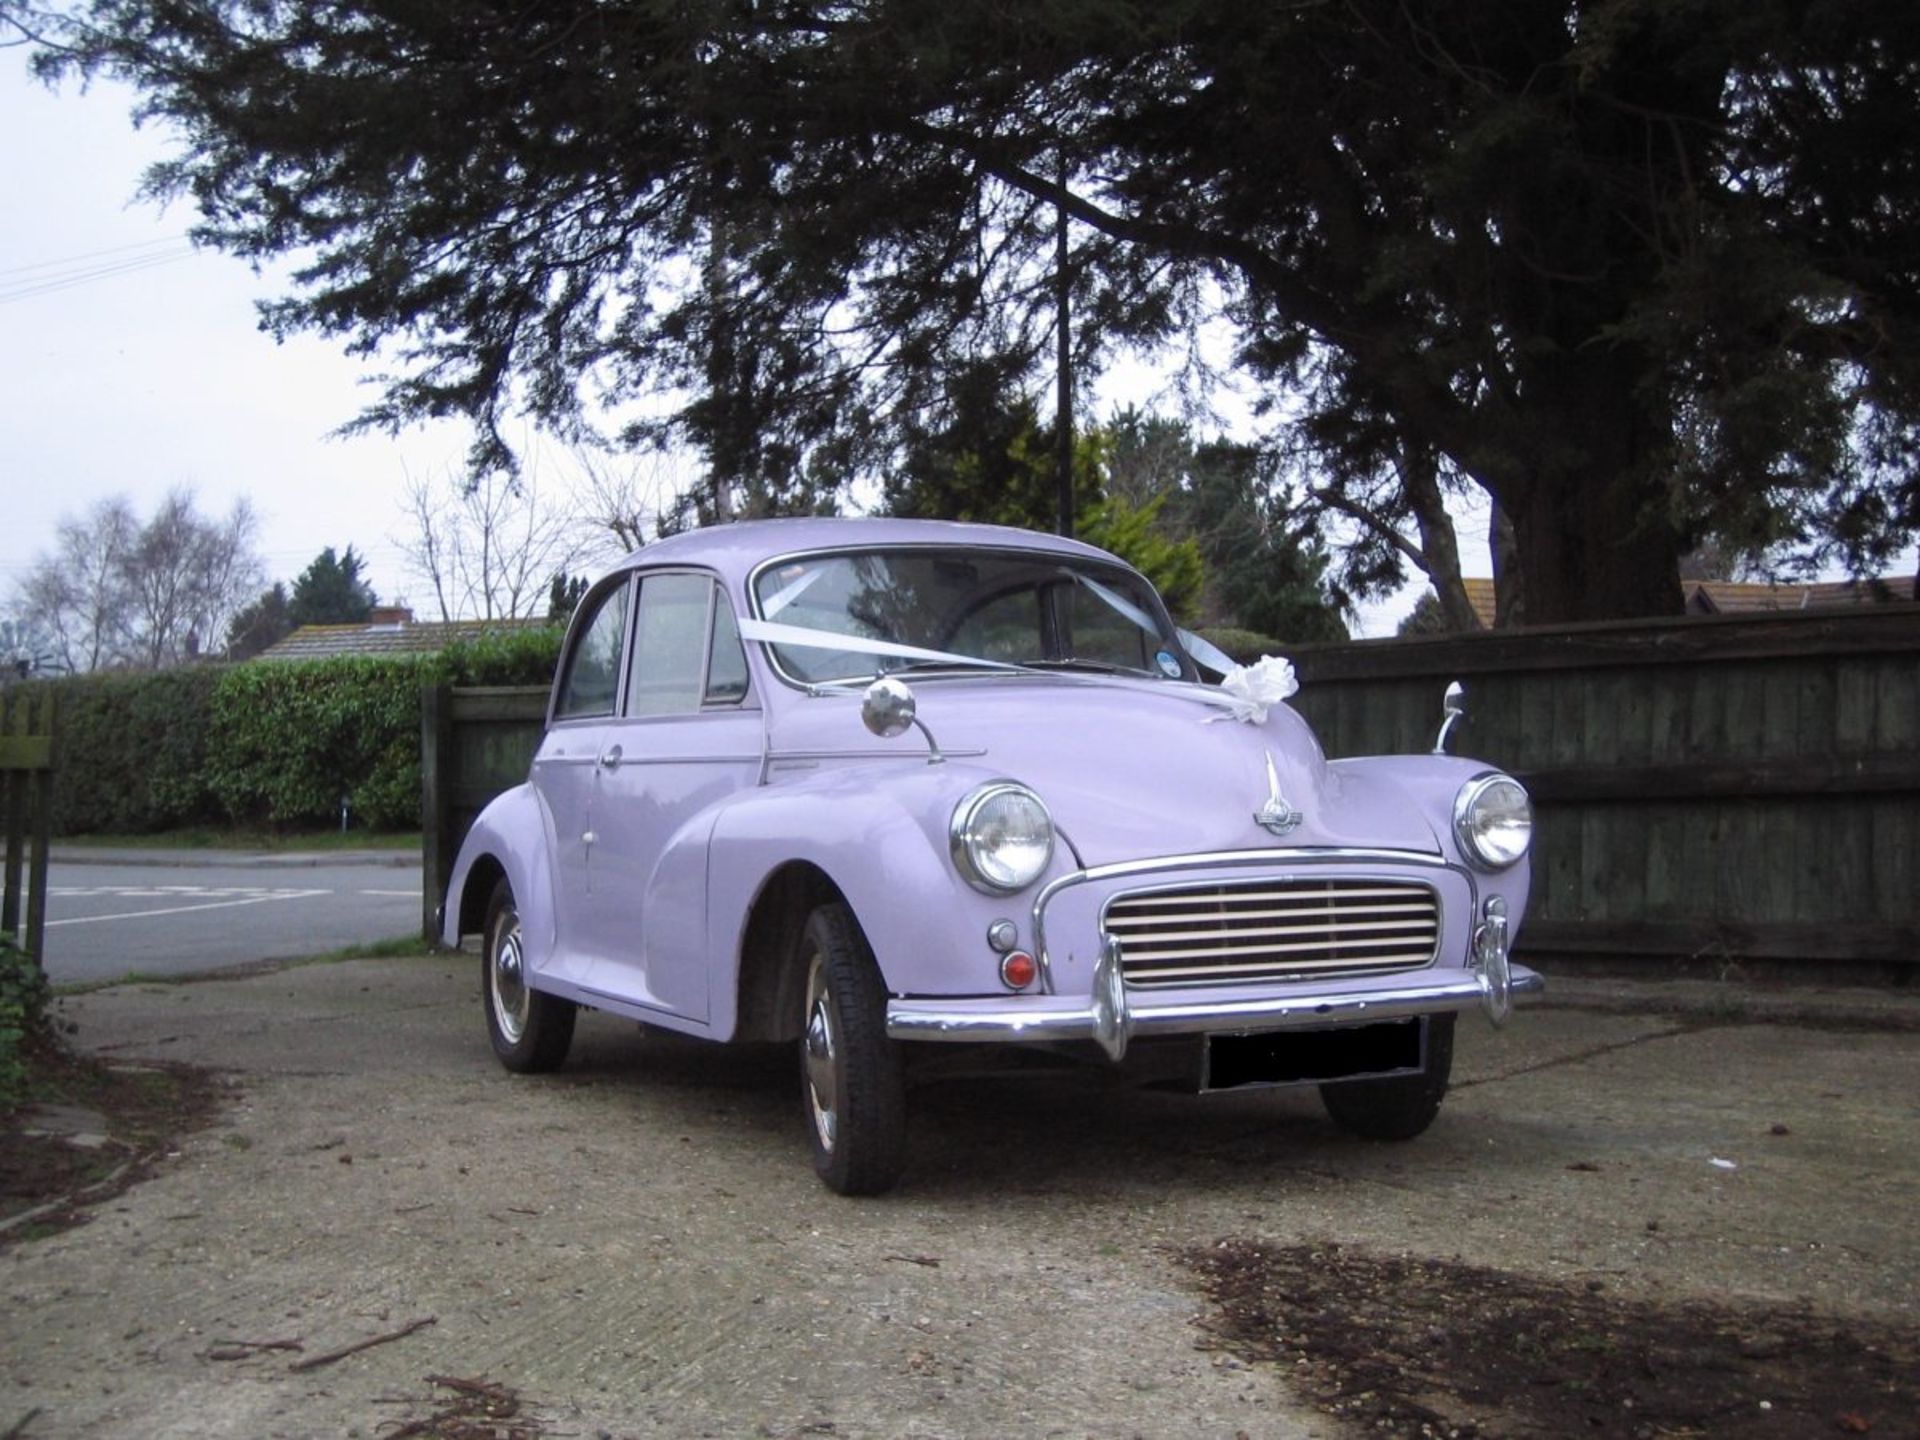 Morris Minor “Million” 1960 - In 1960 the Morris Minor made history when it became the first British